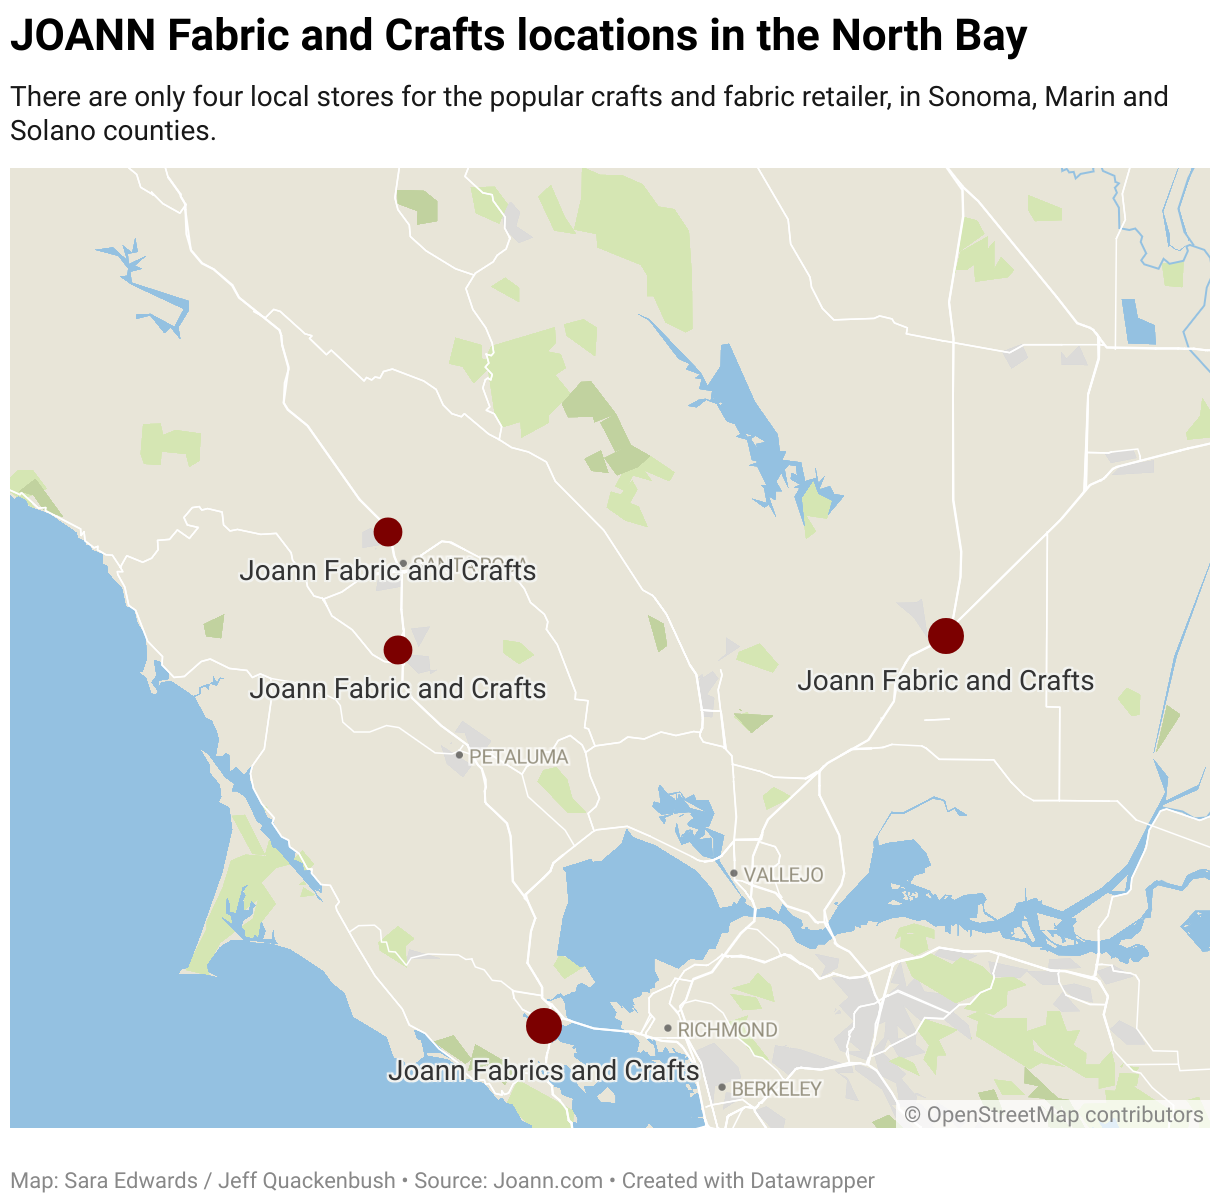 A map showing the two JOANN Fabric and Crafts locations in the North Bay using two maroon dots.